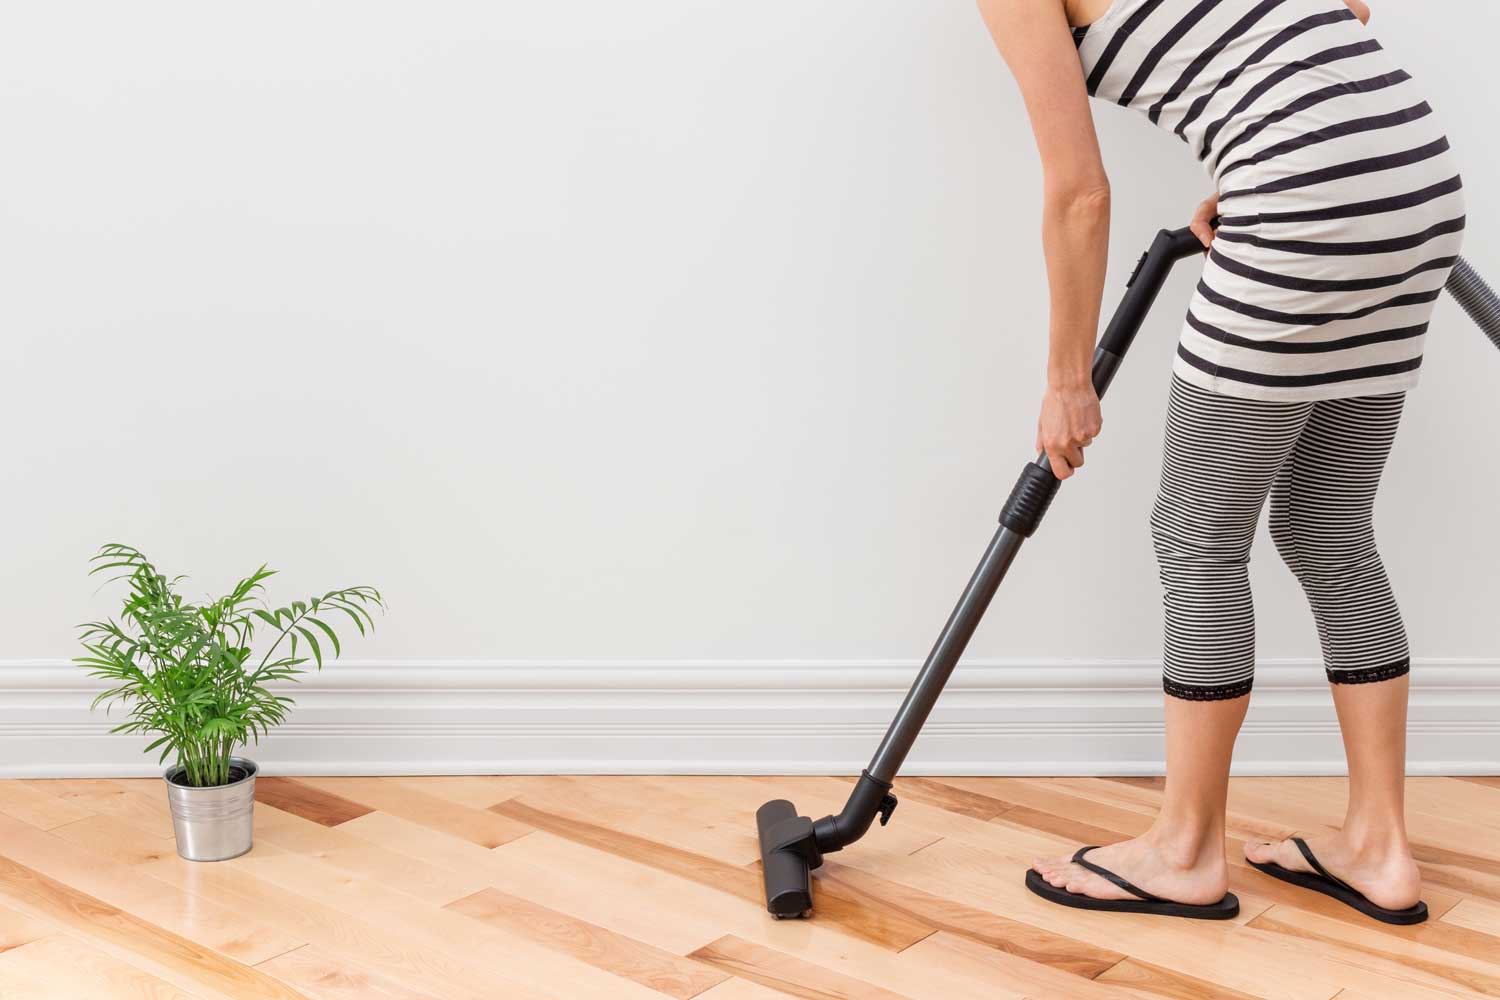 Regulary vacuum or sweep floors to remove dirt and keep your home floors looking amazing - tips from Footprints Floors in Scottsdale / Mesa .